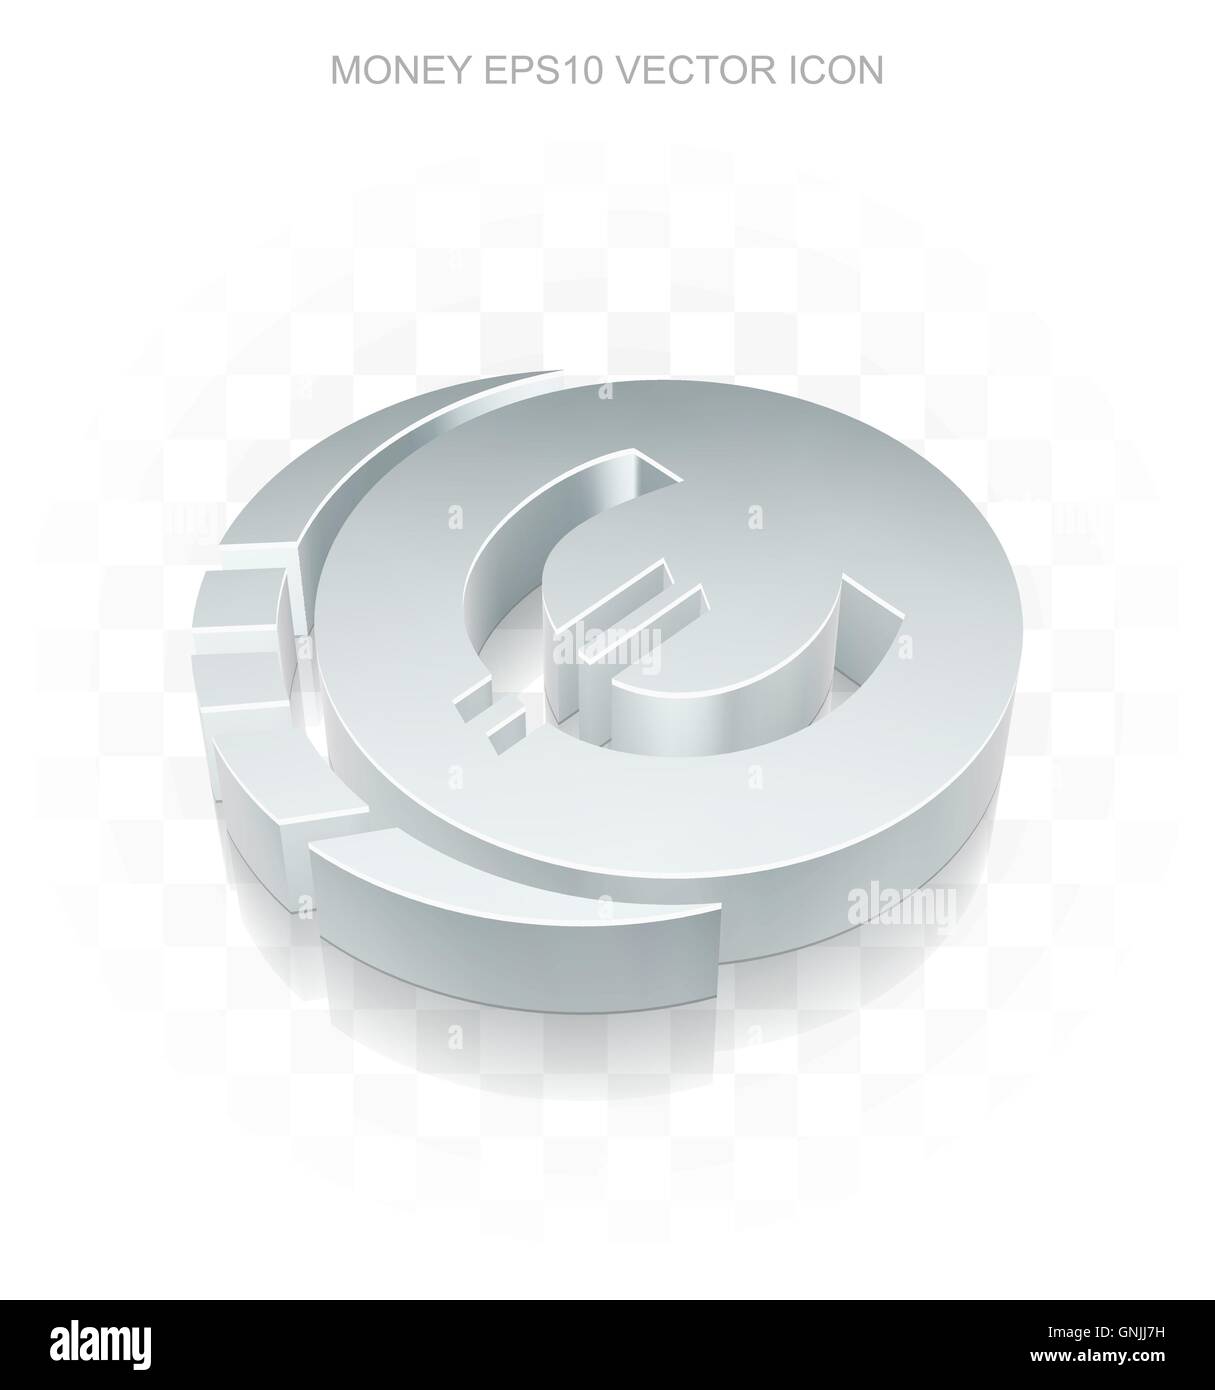 Currency icon: Flat metallic 3d Euro Coin, transparent shadow, EPS 10 vector. Stock Vector